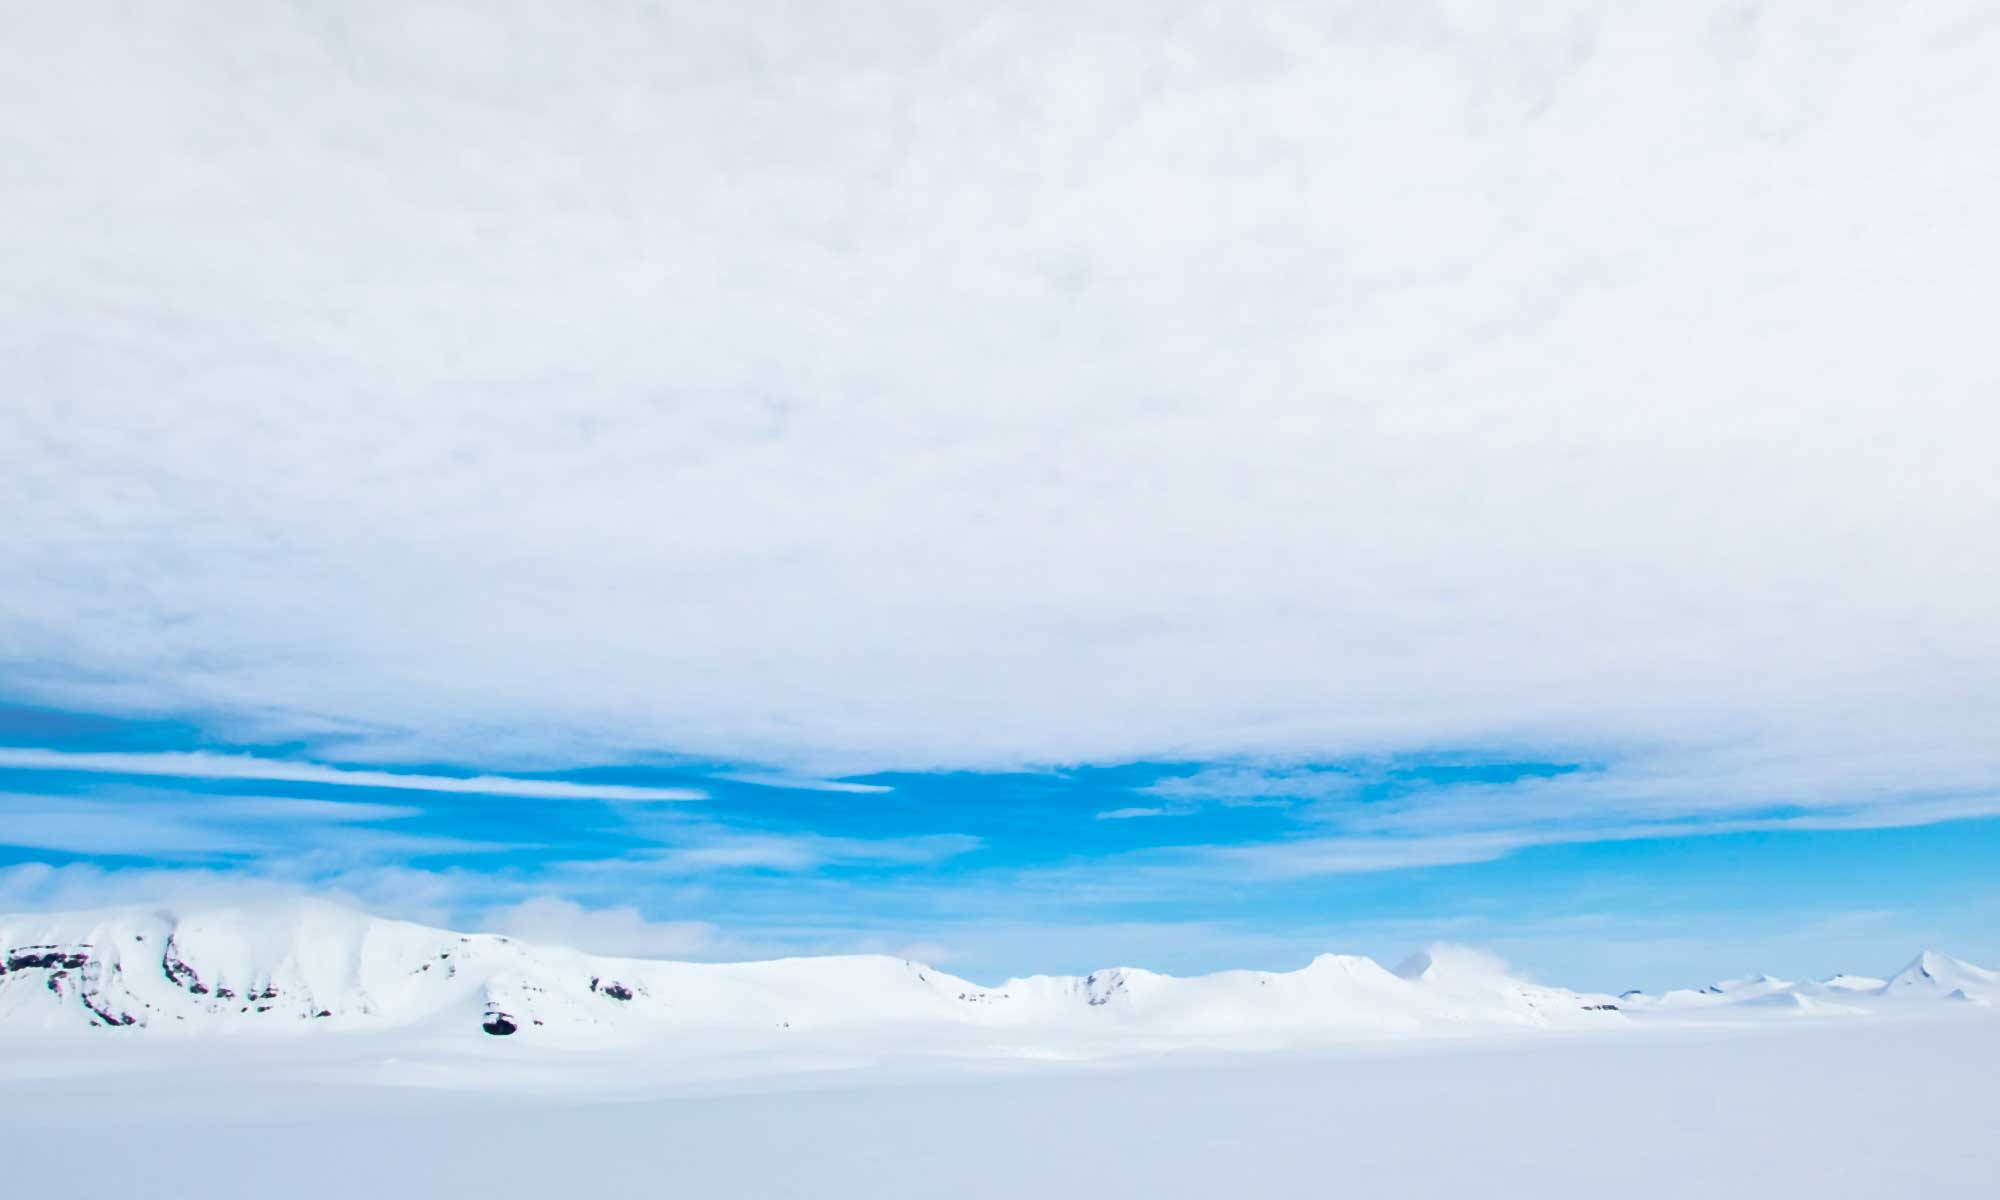 A scientist standing in an Antarctic landscape